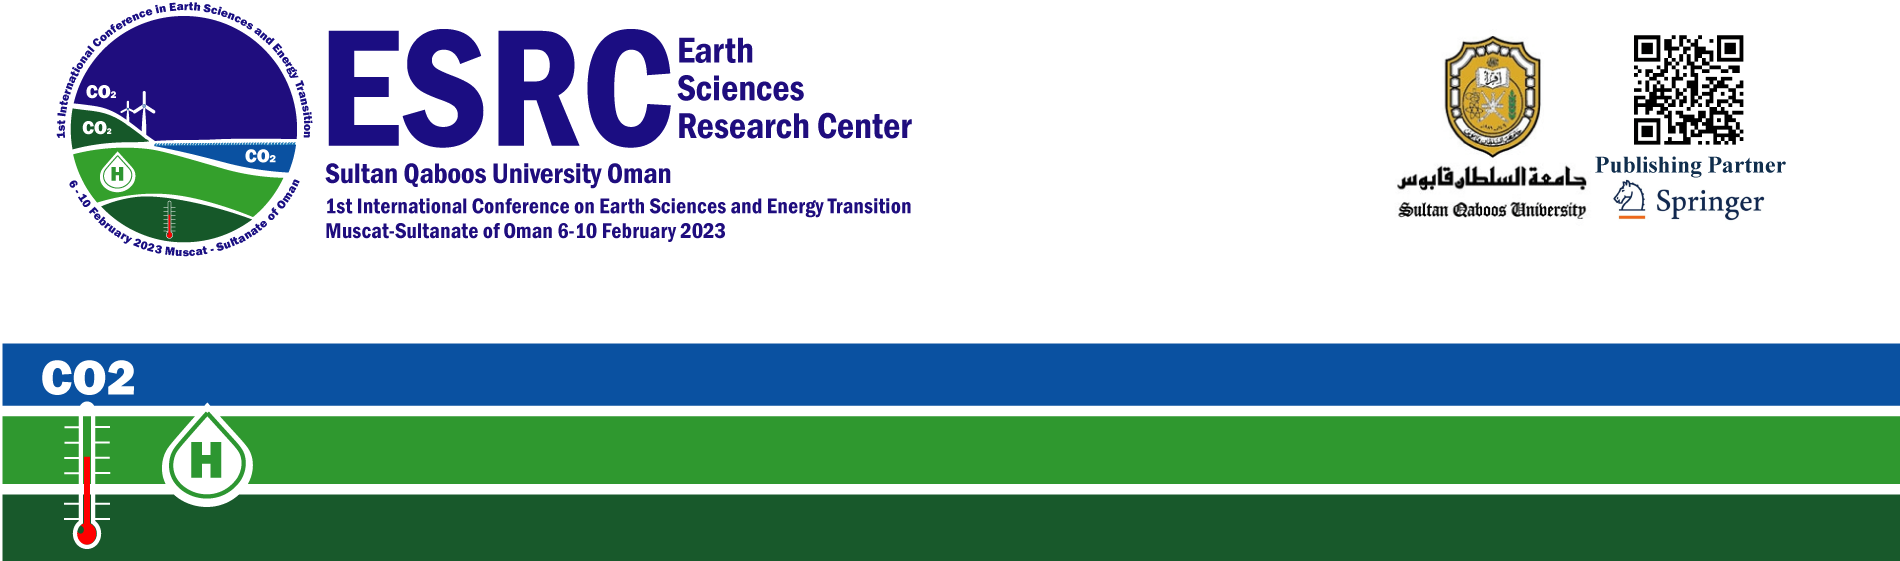 The International Conference on Earth Sciences and Energy Transition